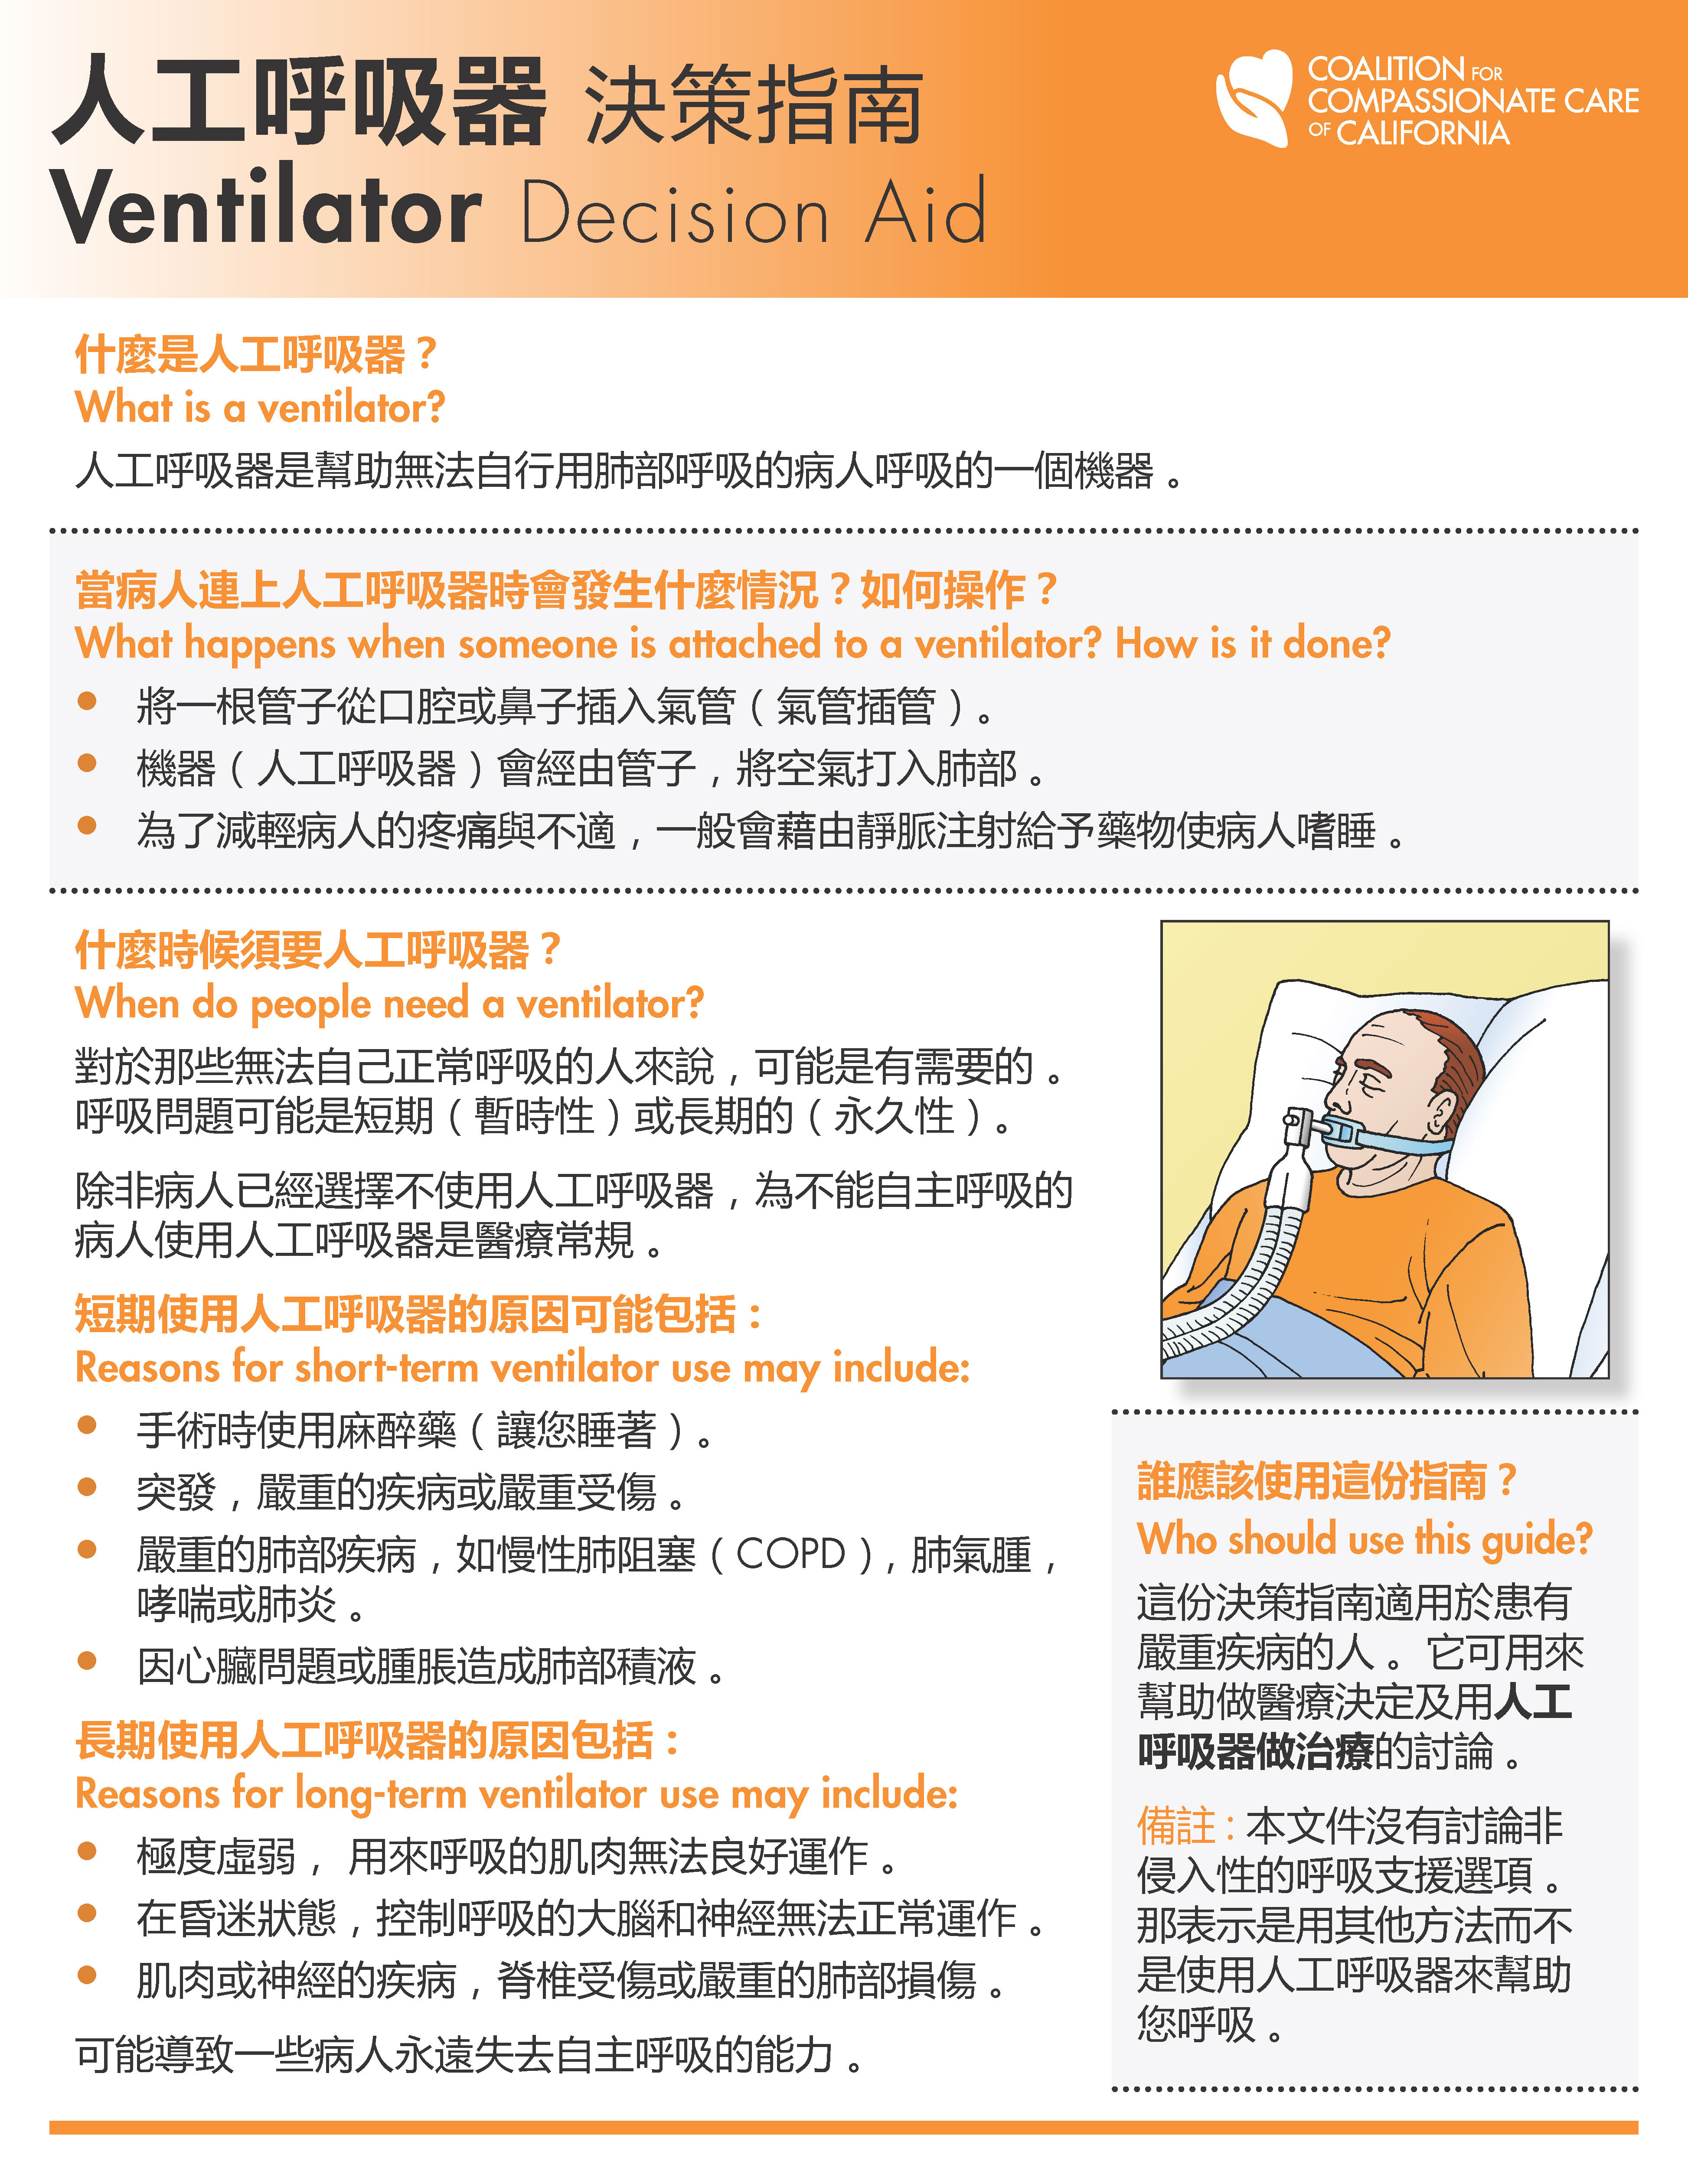 Decision Aid on Ventilator – Chinese